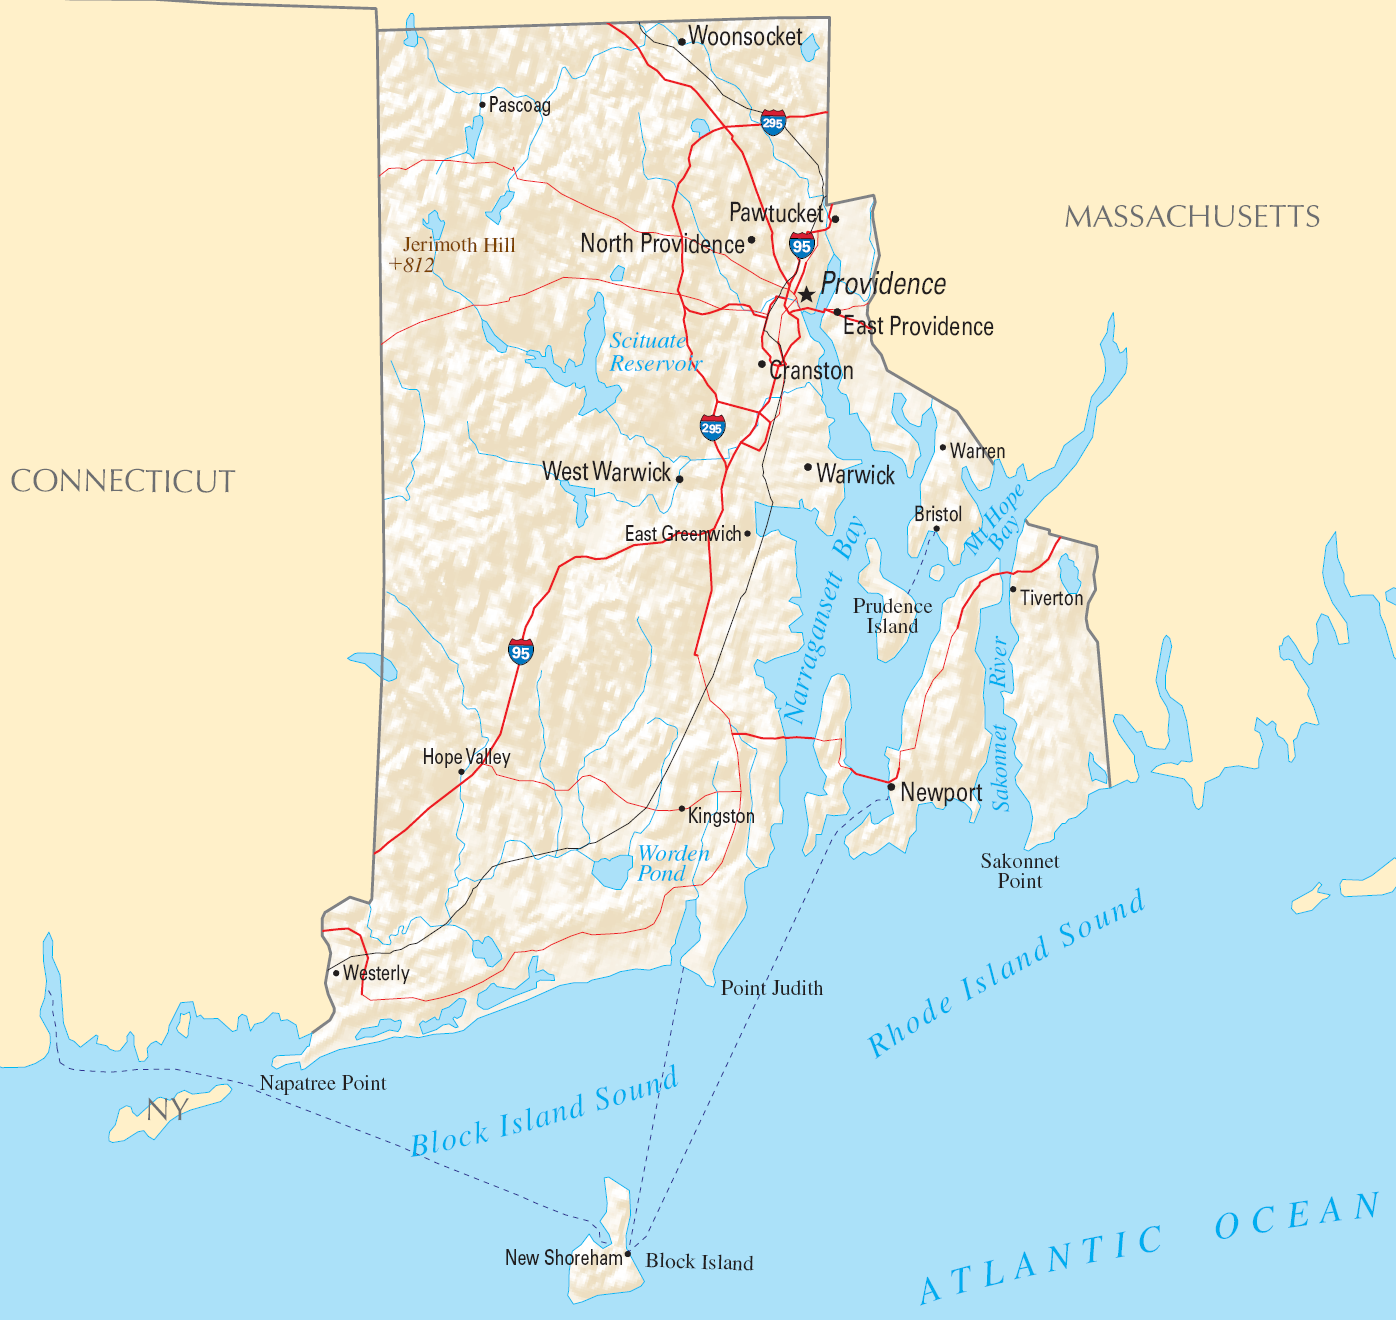 usa-rhode-island-state-s-name-change-political-geography-now